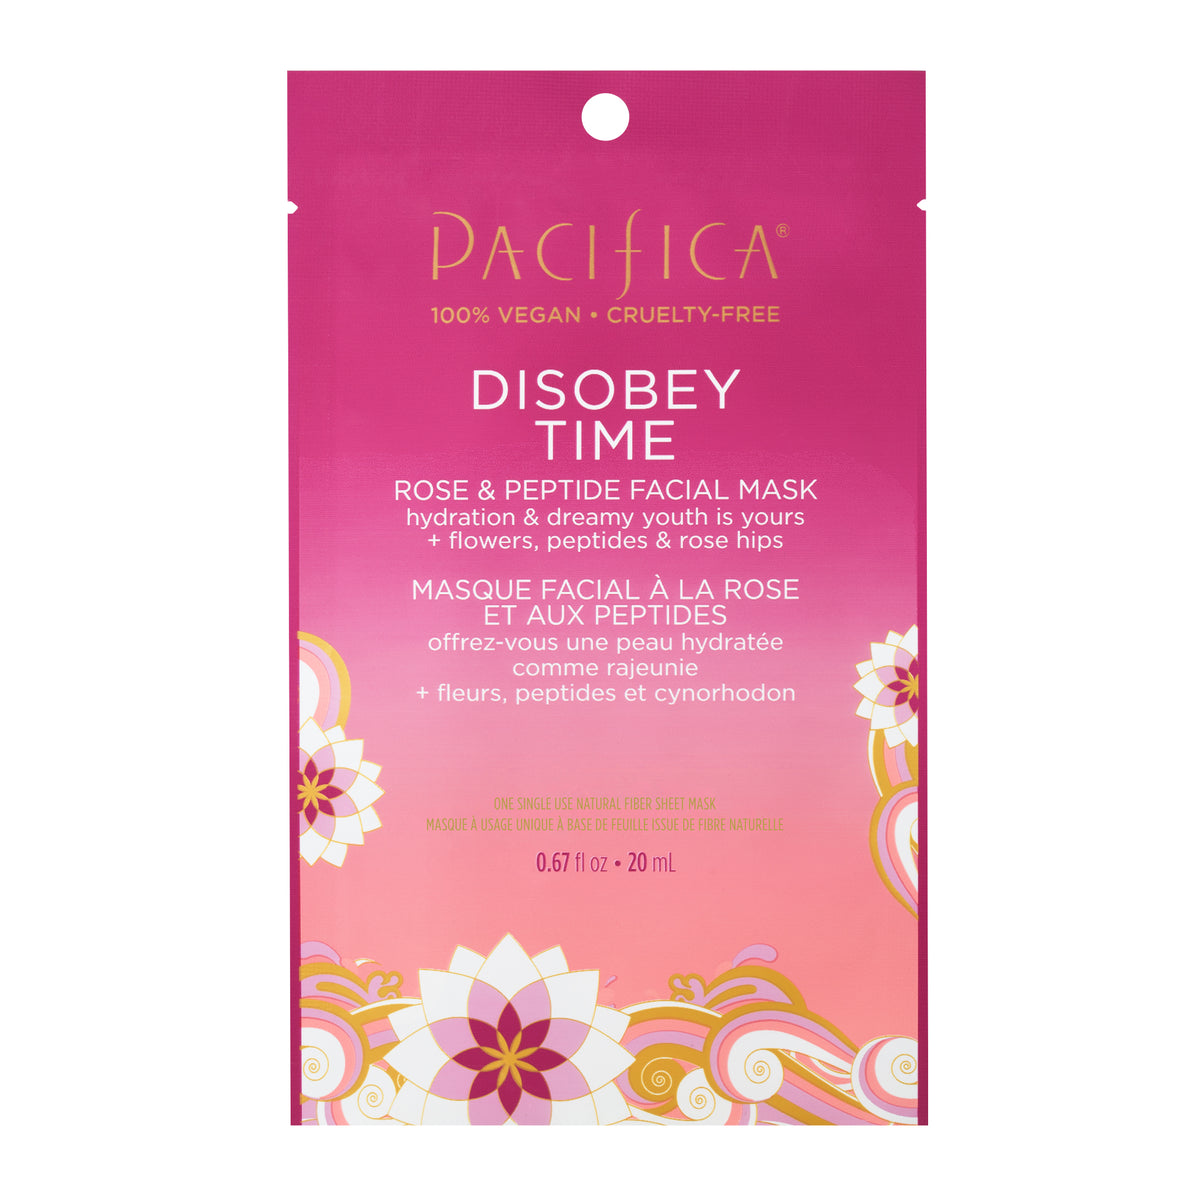 Disobey Time Rose & Peptide Facial Mask - Skin Care - Pacifica Beauty